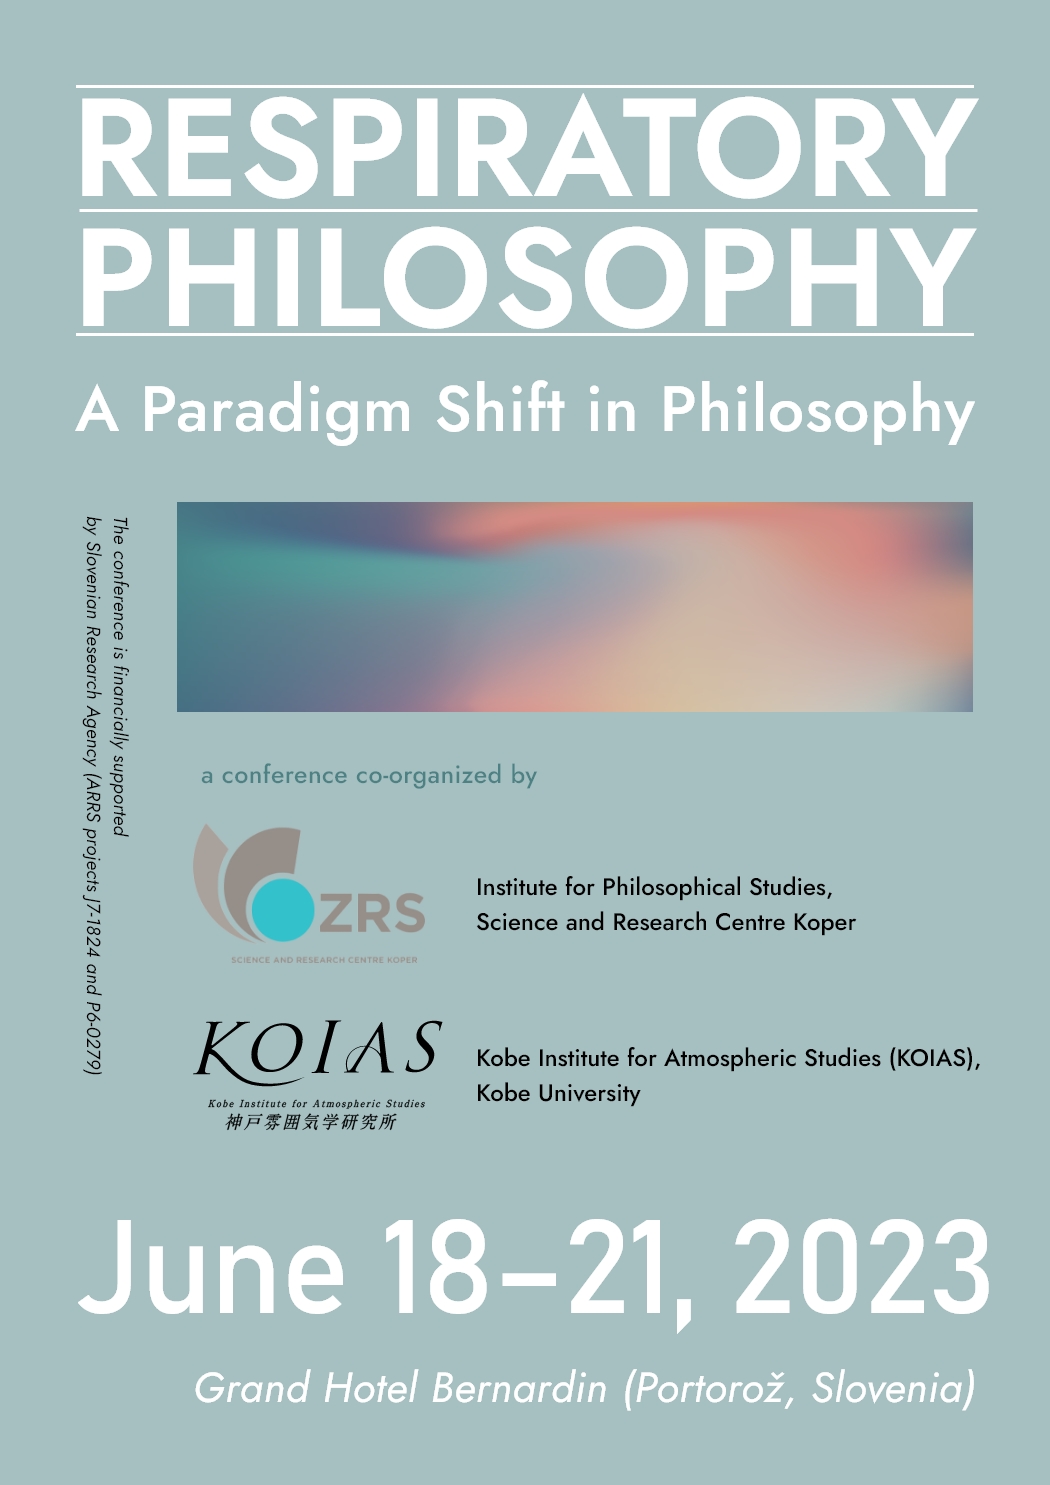 RESPIRATORY PHILOSOPHY A Paradime Shift in Philosophy